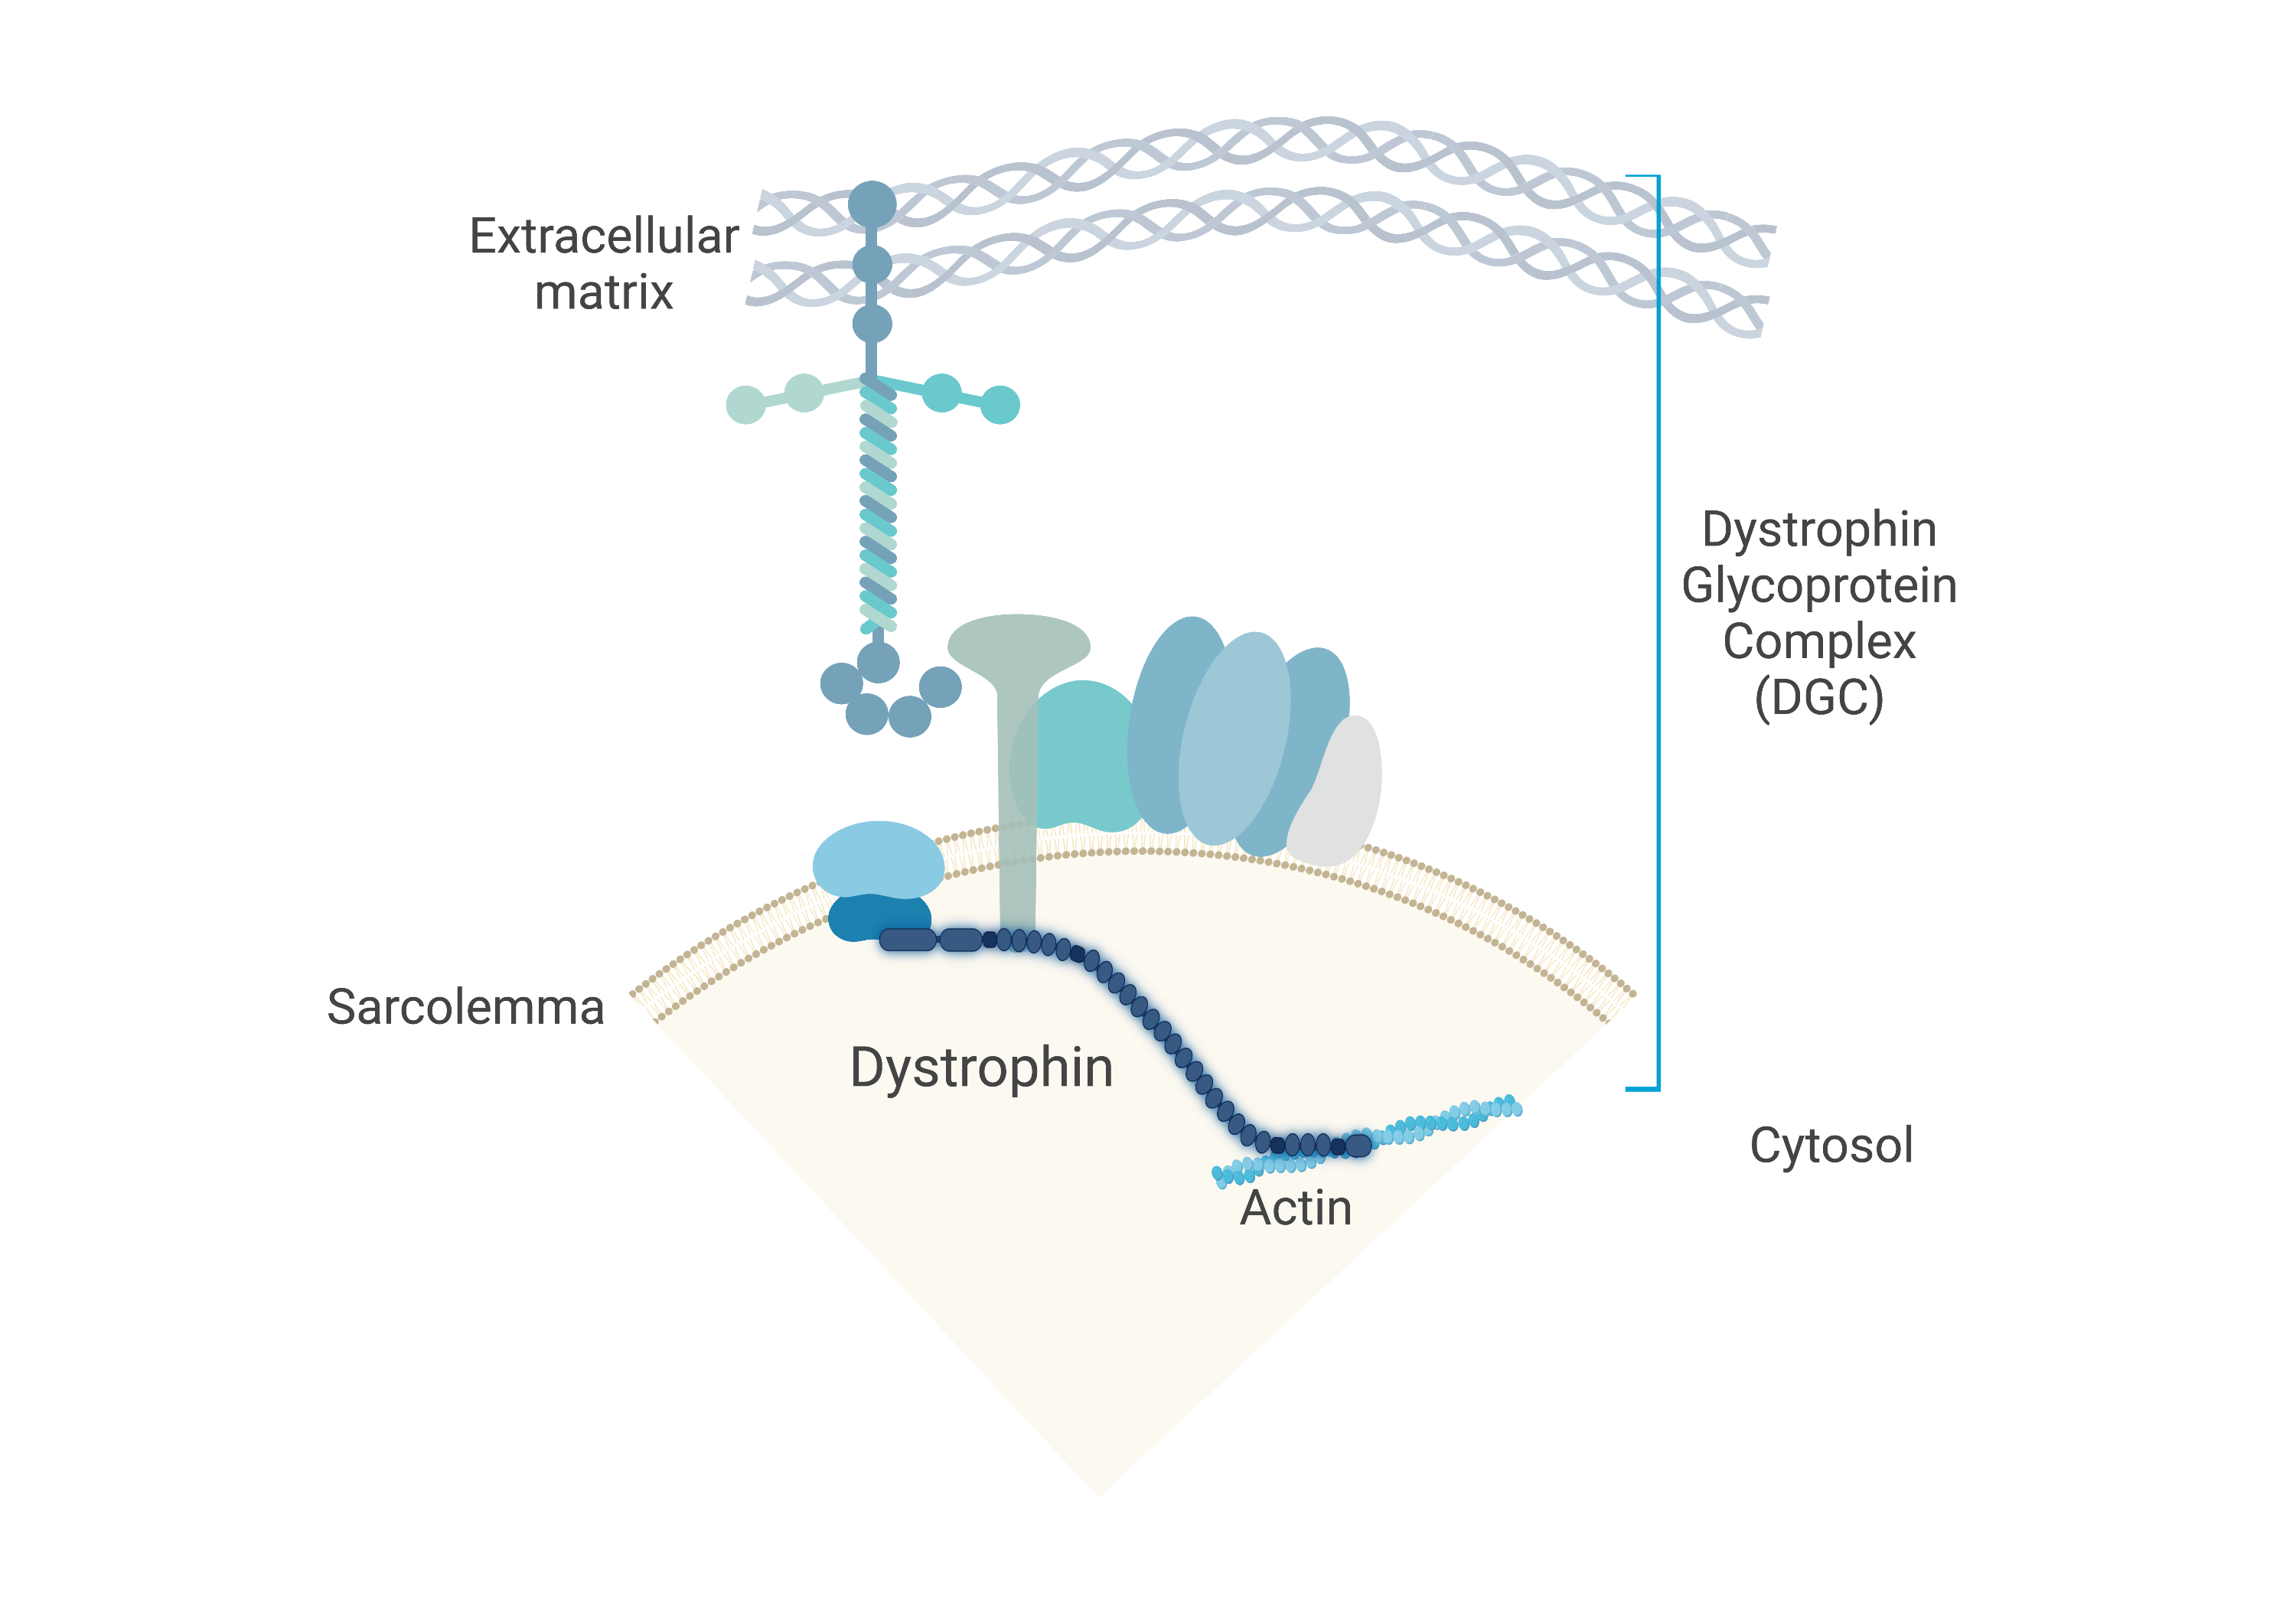 Schematic showing the dystrophin glycoprotein complex (DGC) tethered between the sarcolemma and the extracellular matrix